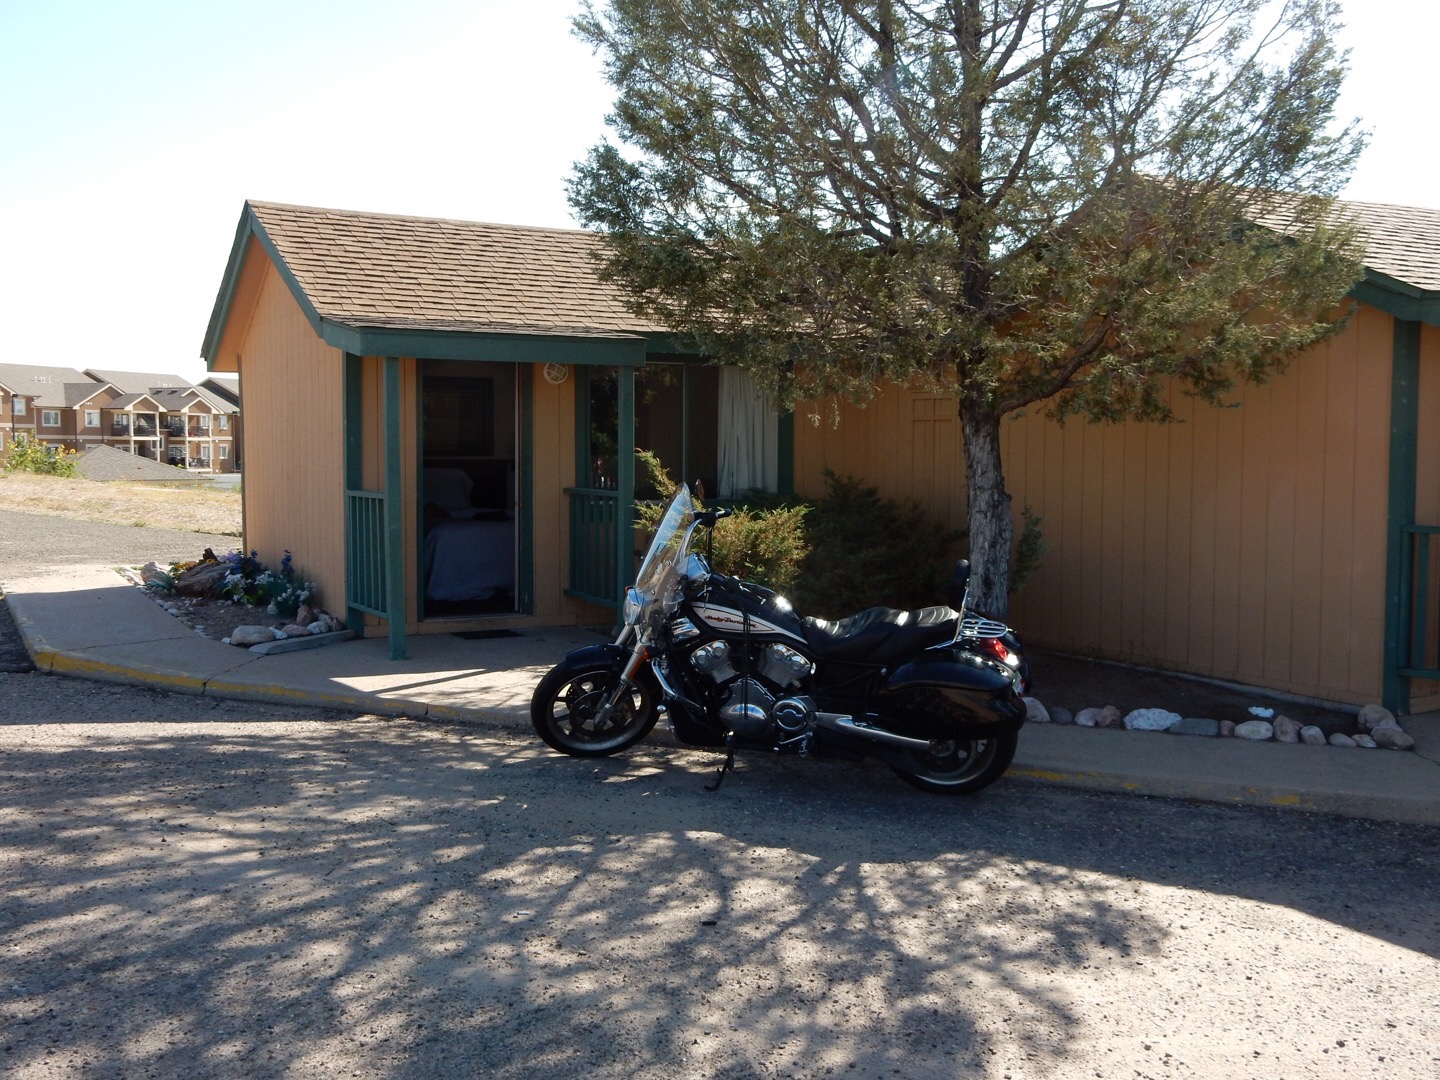 My abode at the Round Up Motel